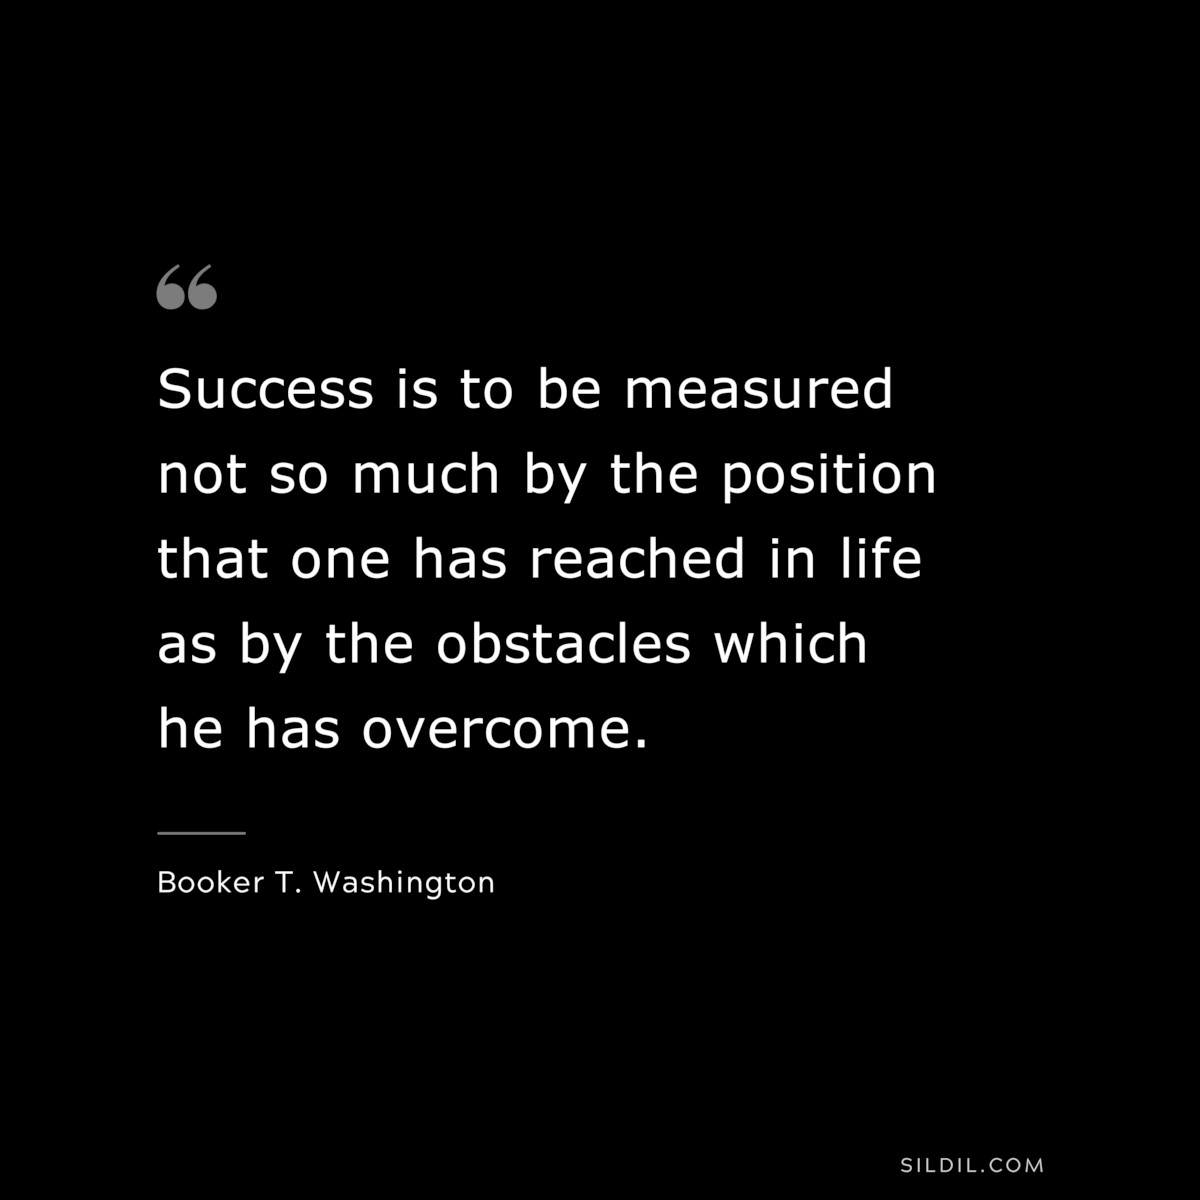 Success is to be measured not so much by the position that one has reached in life as by the obstacles which he has overcome. ― Booker T. Washington